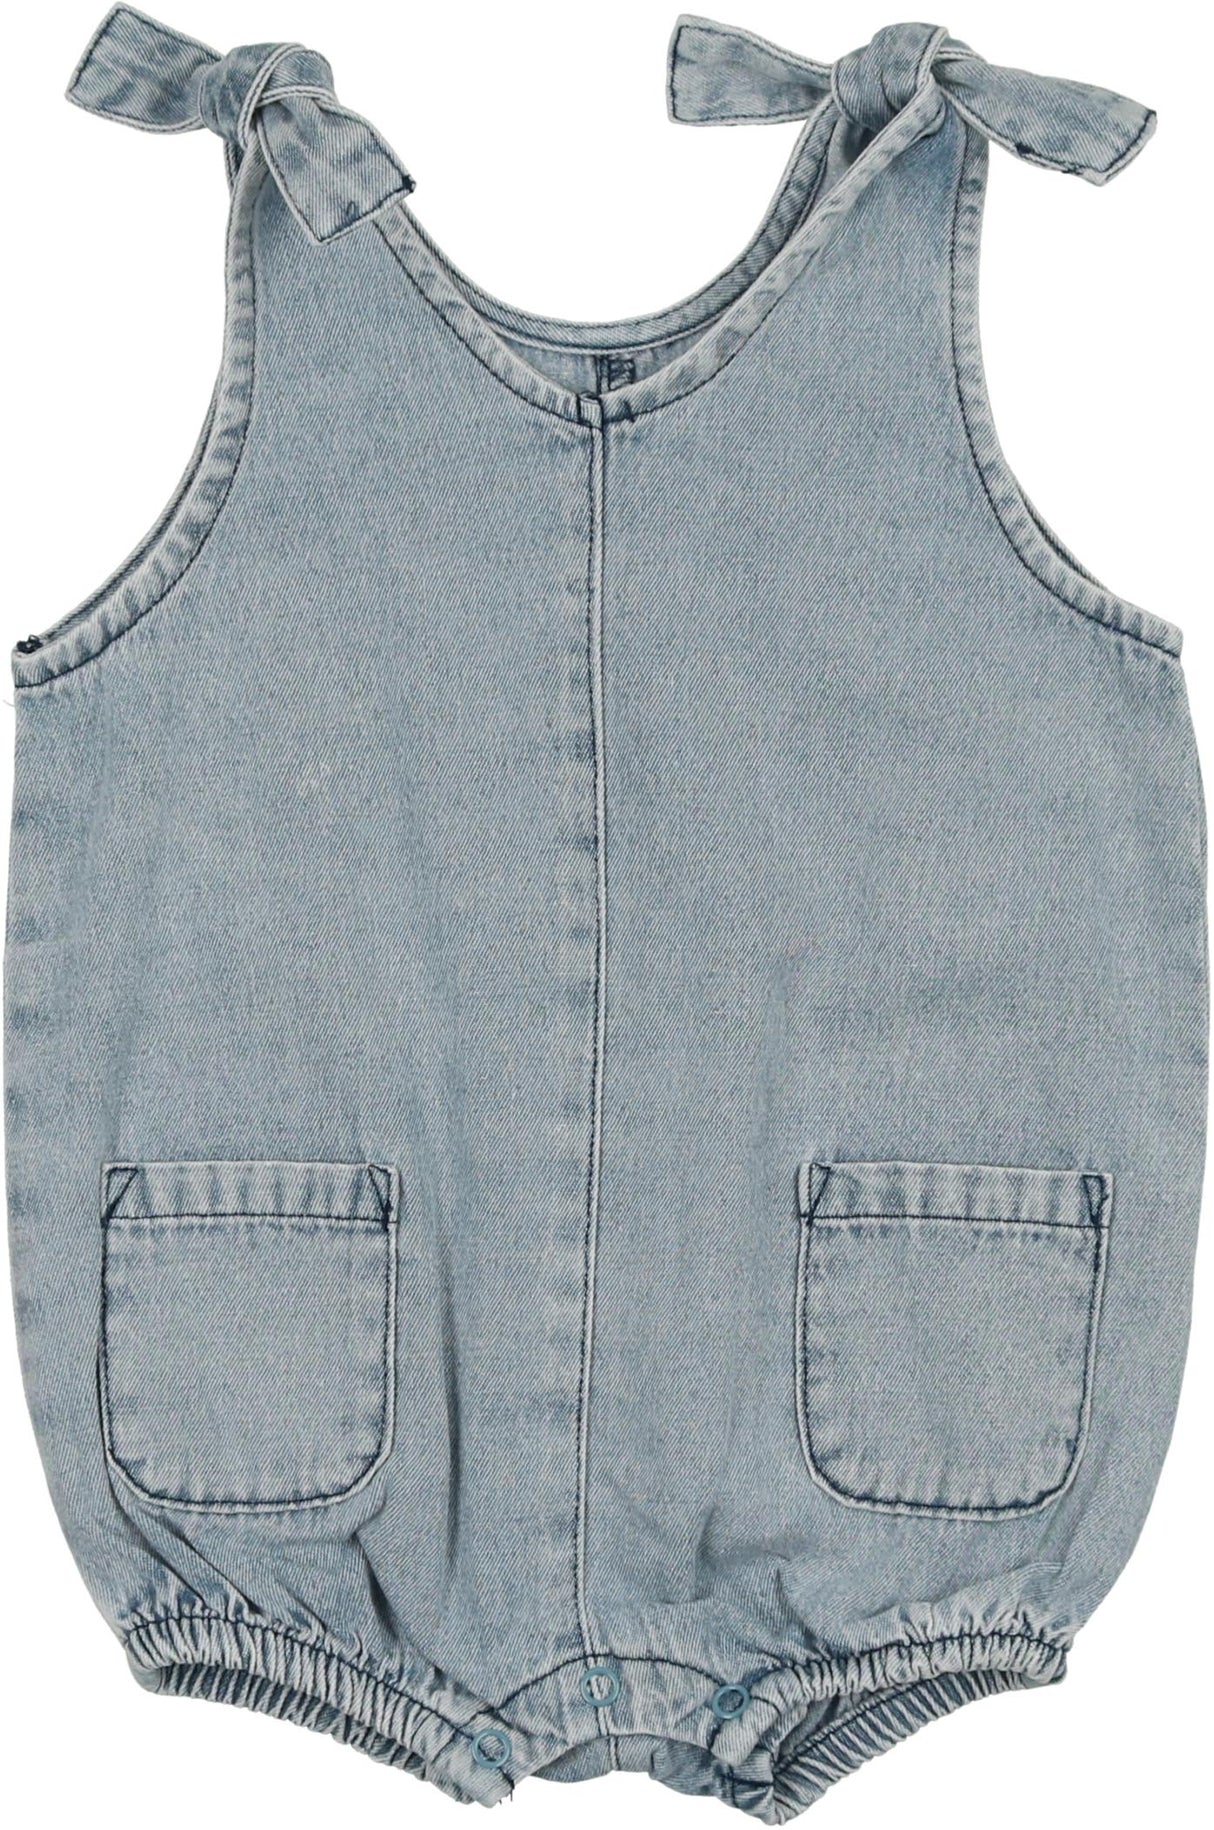 Analogie by Lil Legs Stonewash Collection Baby Toddler Boys Romper